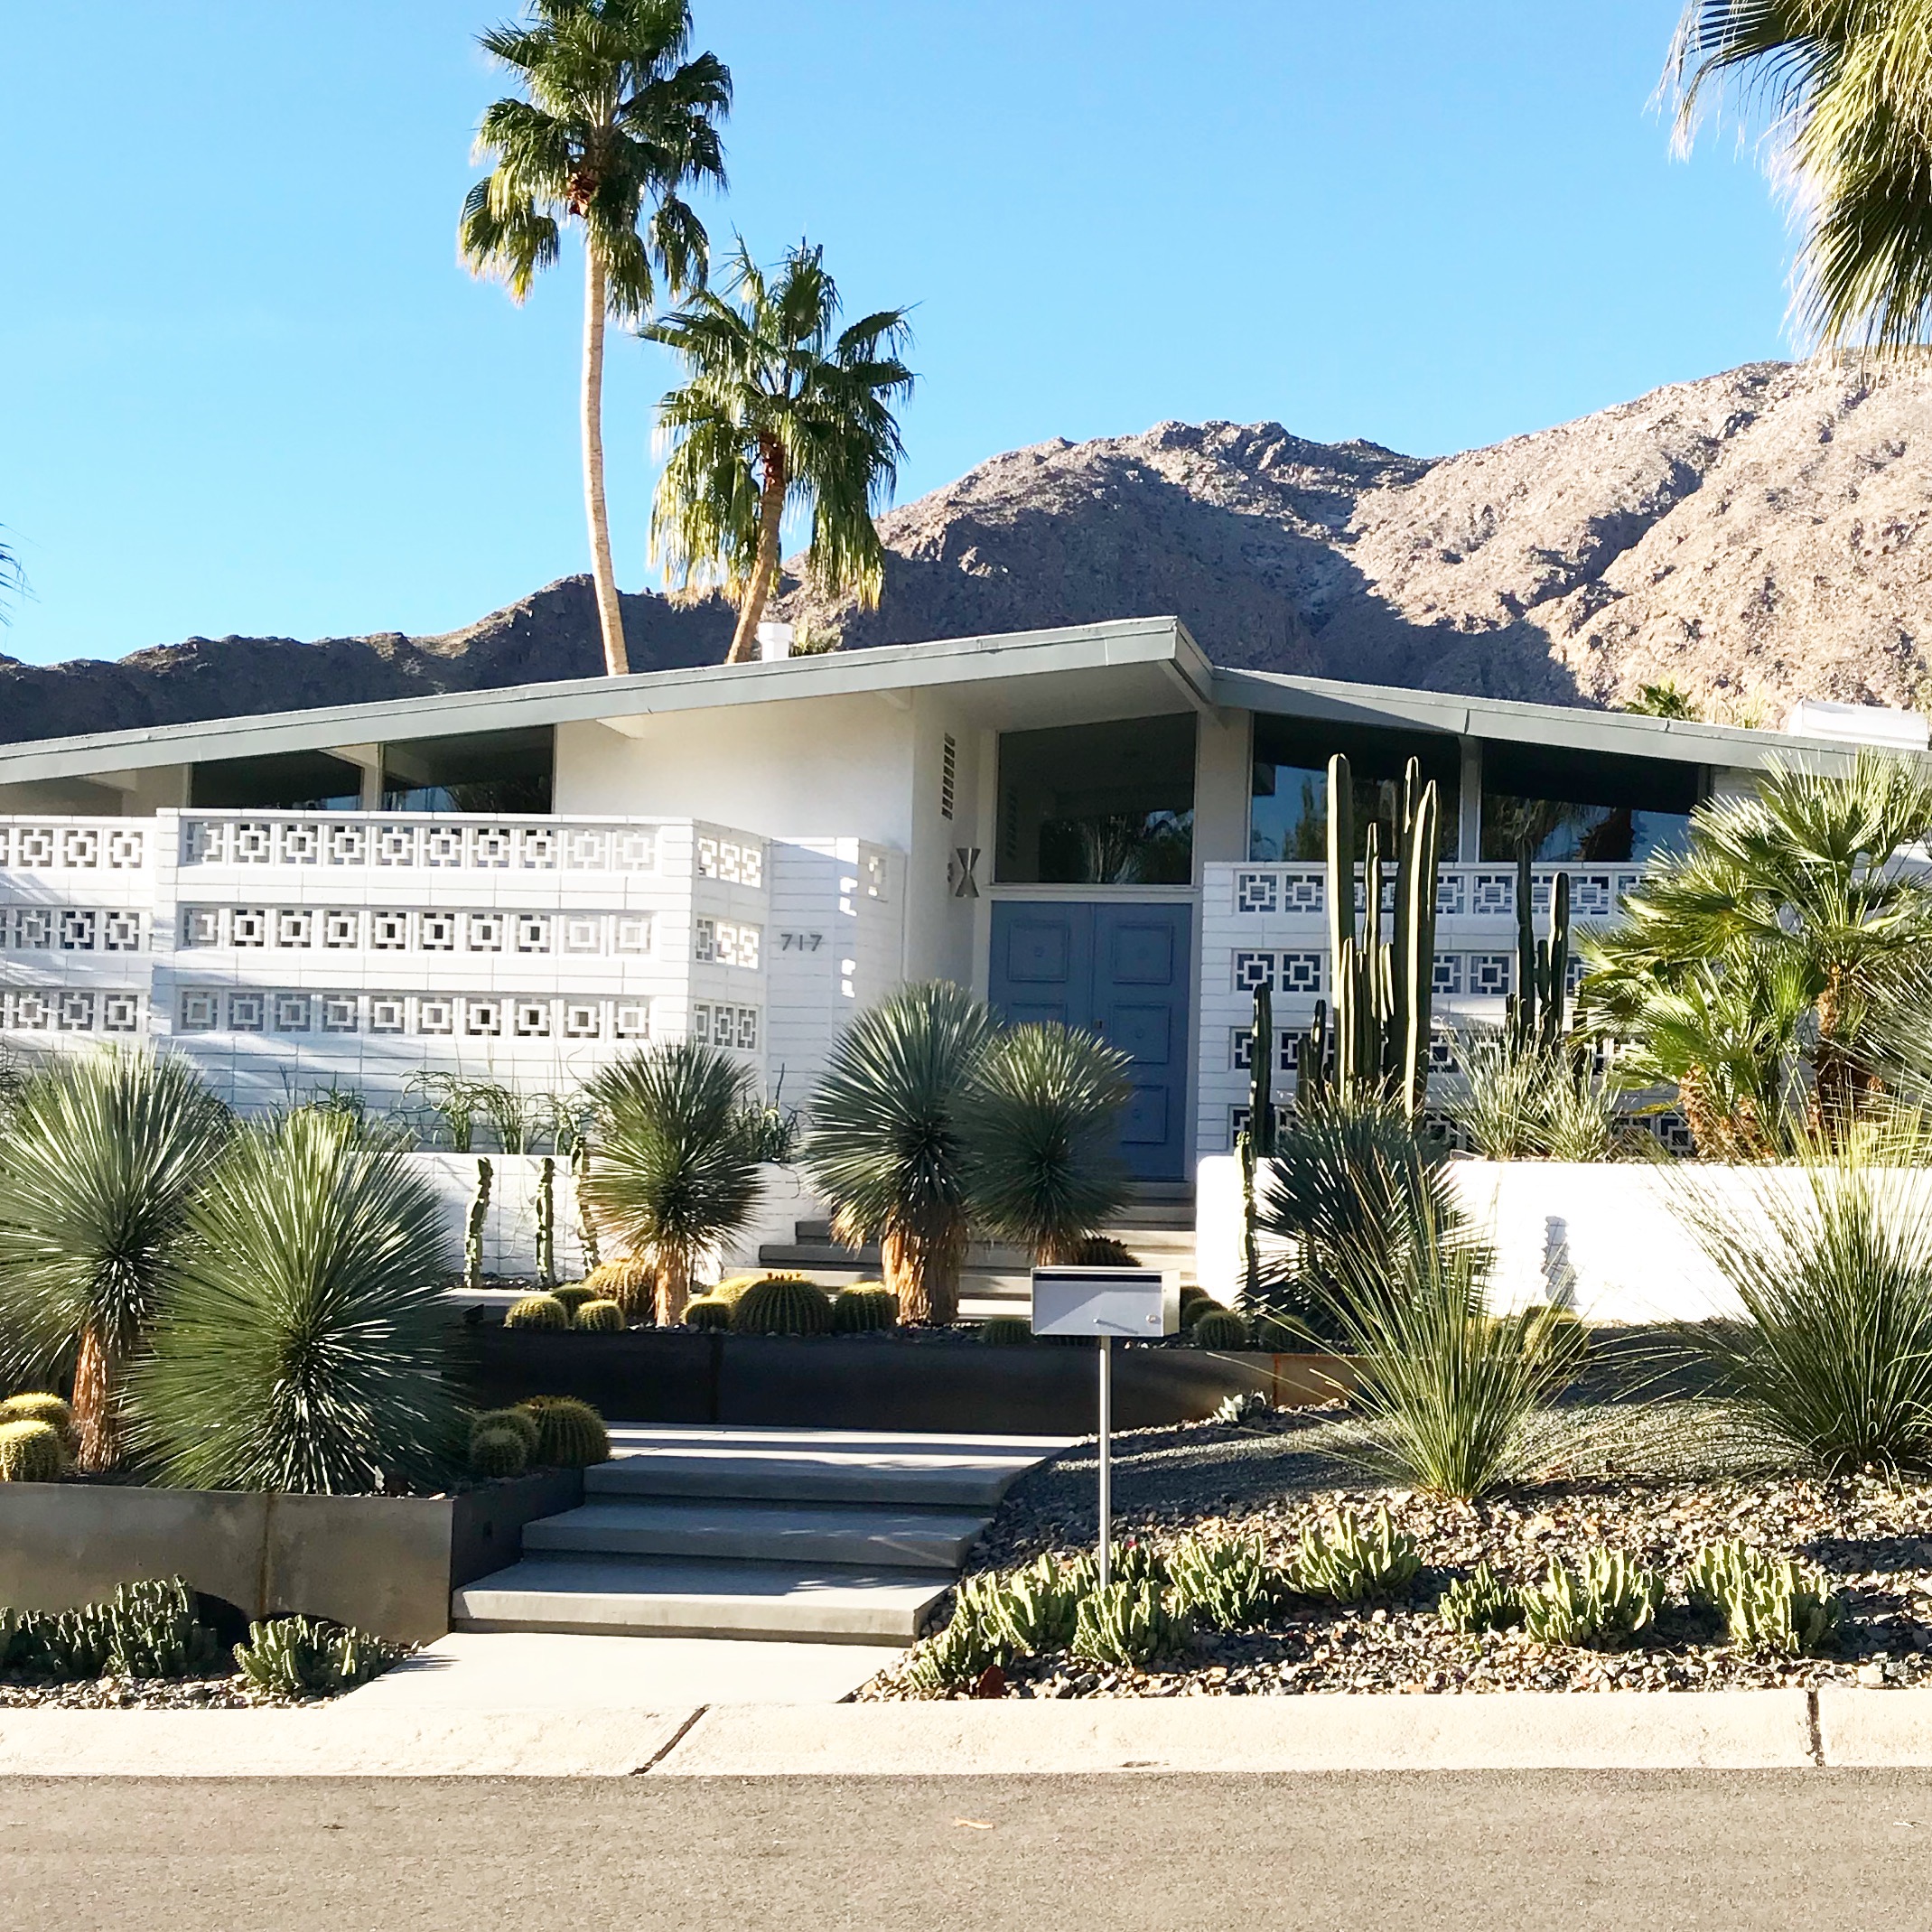 Blue Moon Furniture Blog Architectural Tour Of Palm Springs